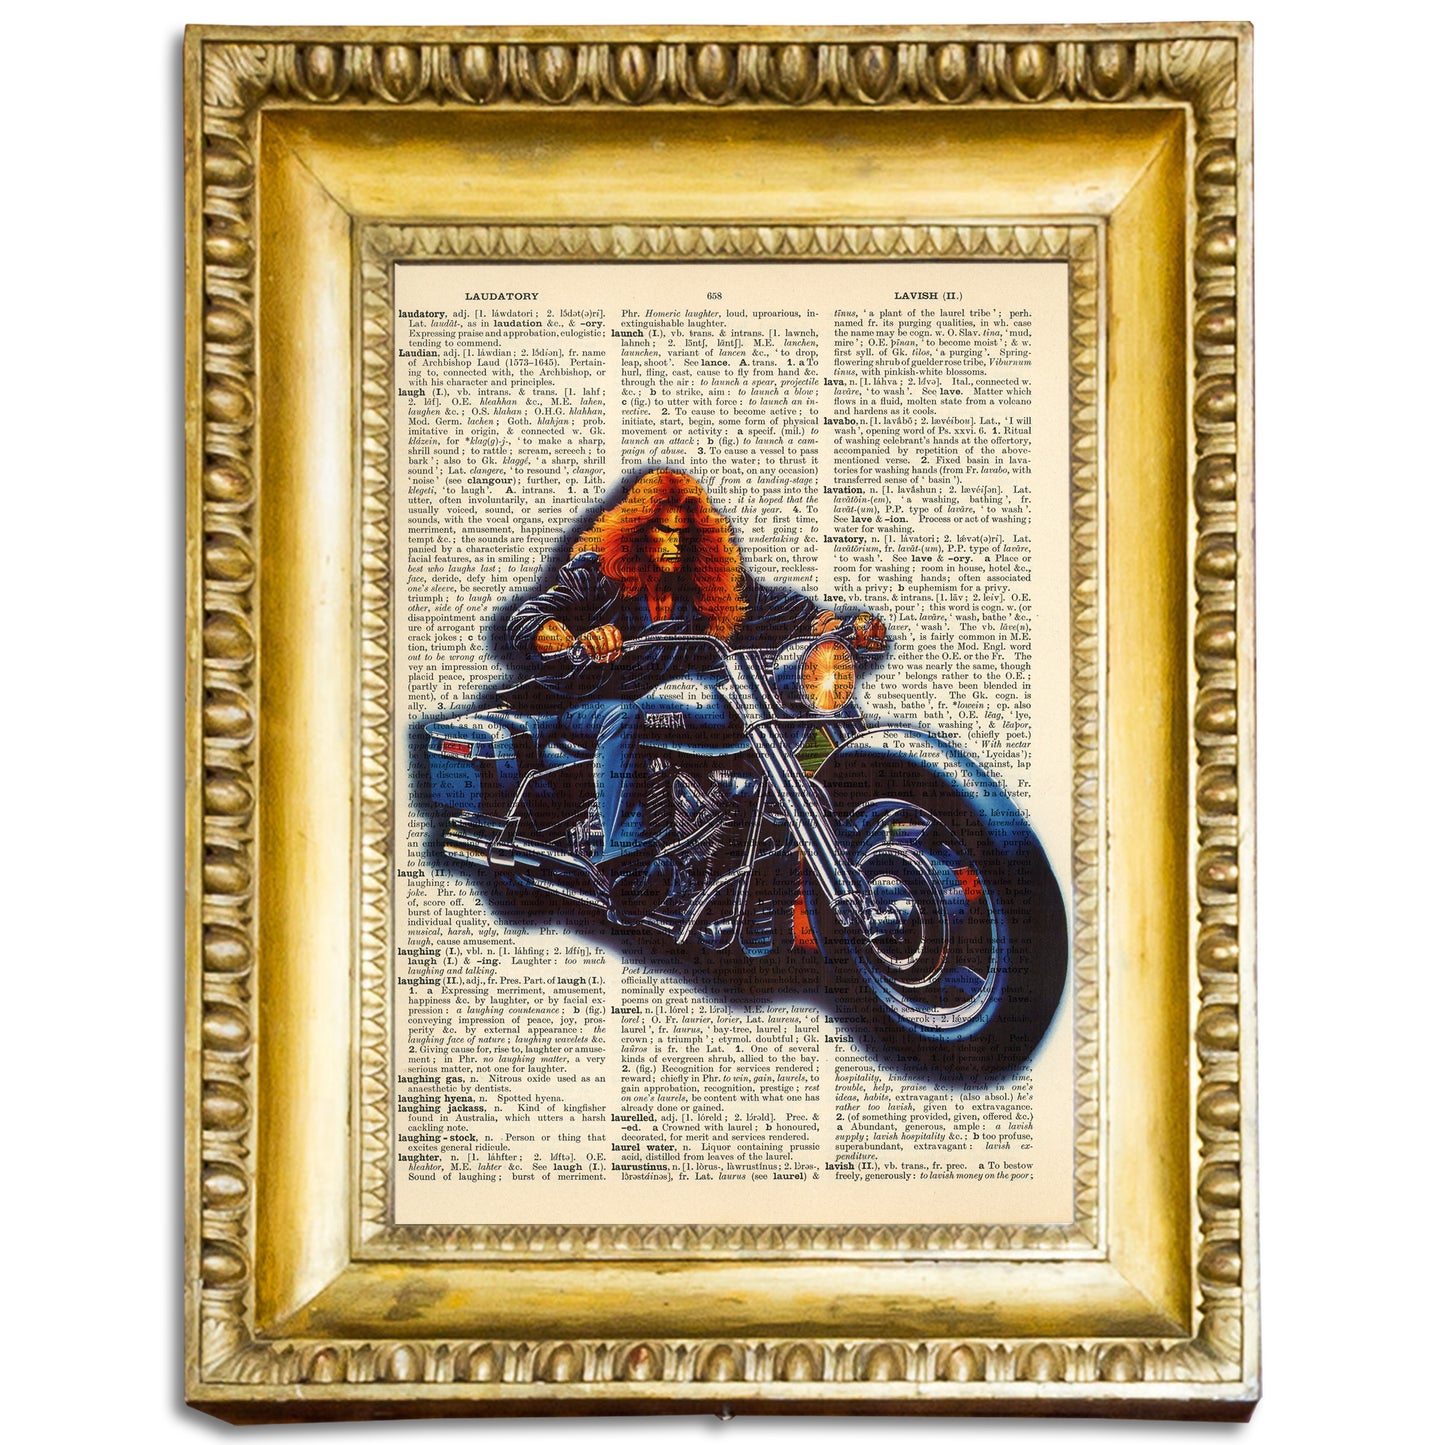 "Born To Be Wild" digital graphic on an upcycled vintage English dictionary page.